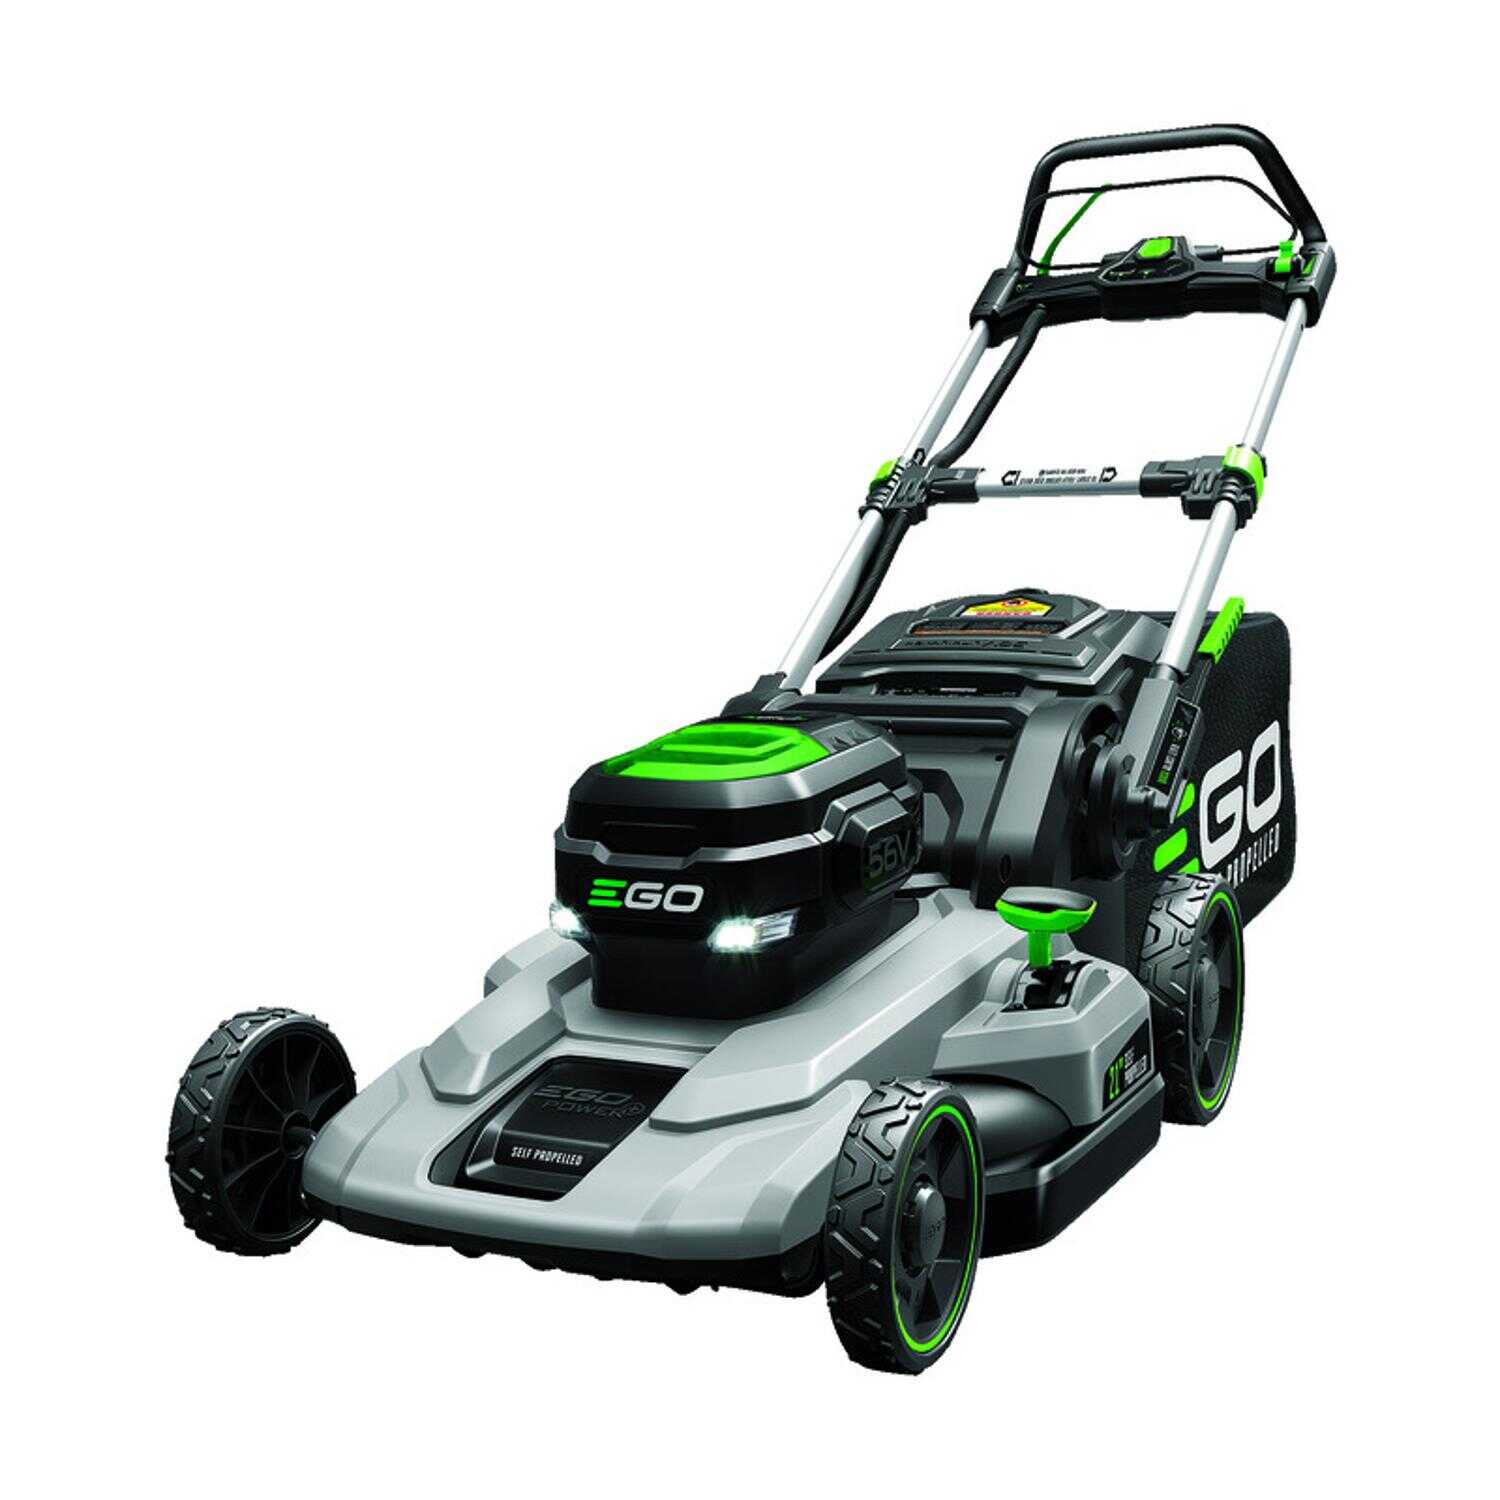 Ace Hardware Offer: EGO Power+ Select Cut LM2135SP 21 in. 56 V Battery Self-Propelled Lawn Mower Kit (Battery & Charger) for $599